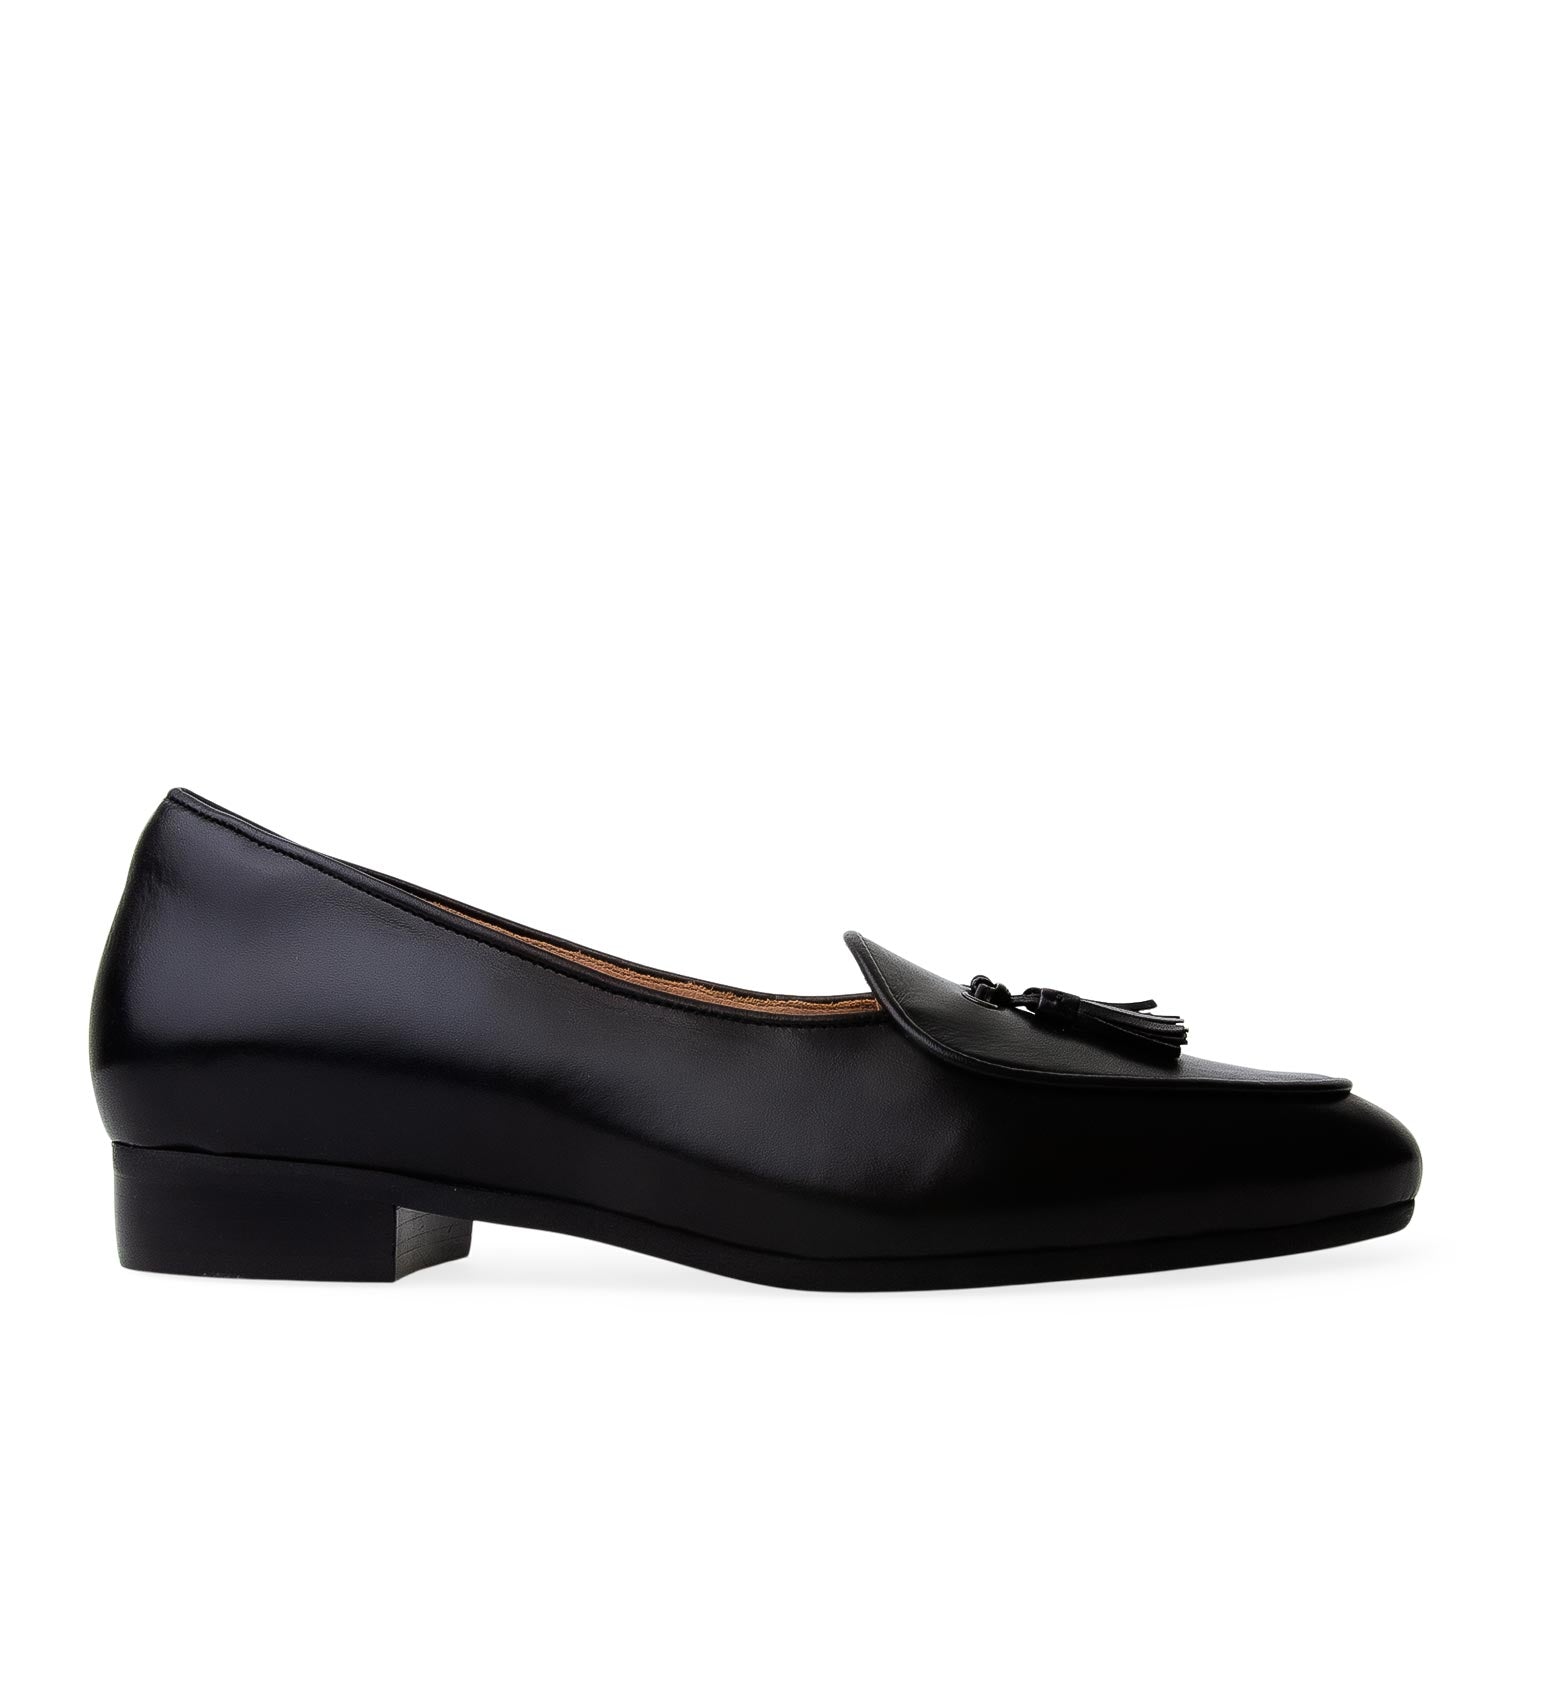 Duckling Black Leather Loafers | Bared Footwear